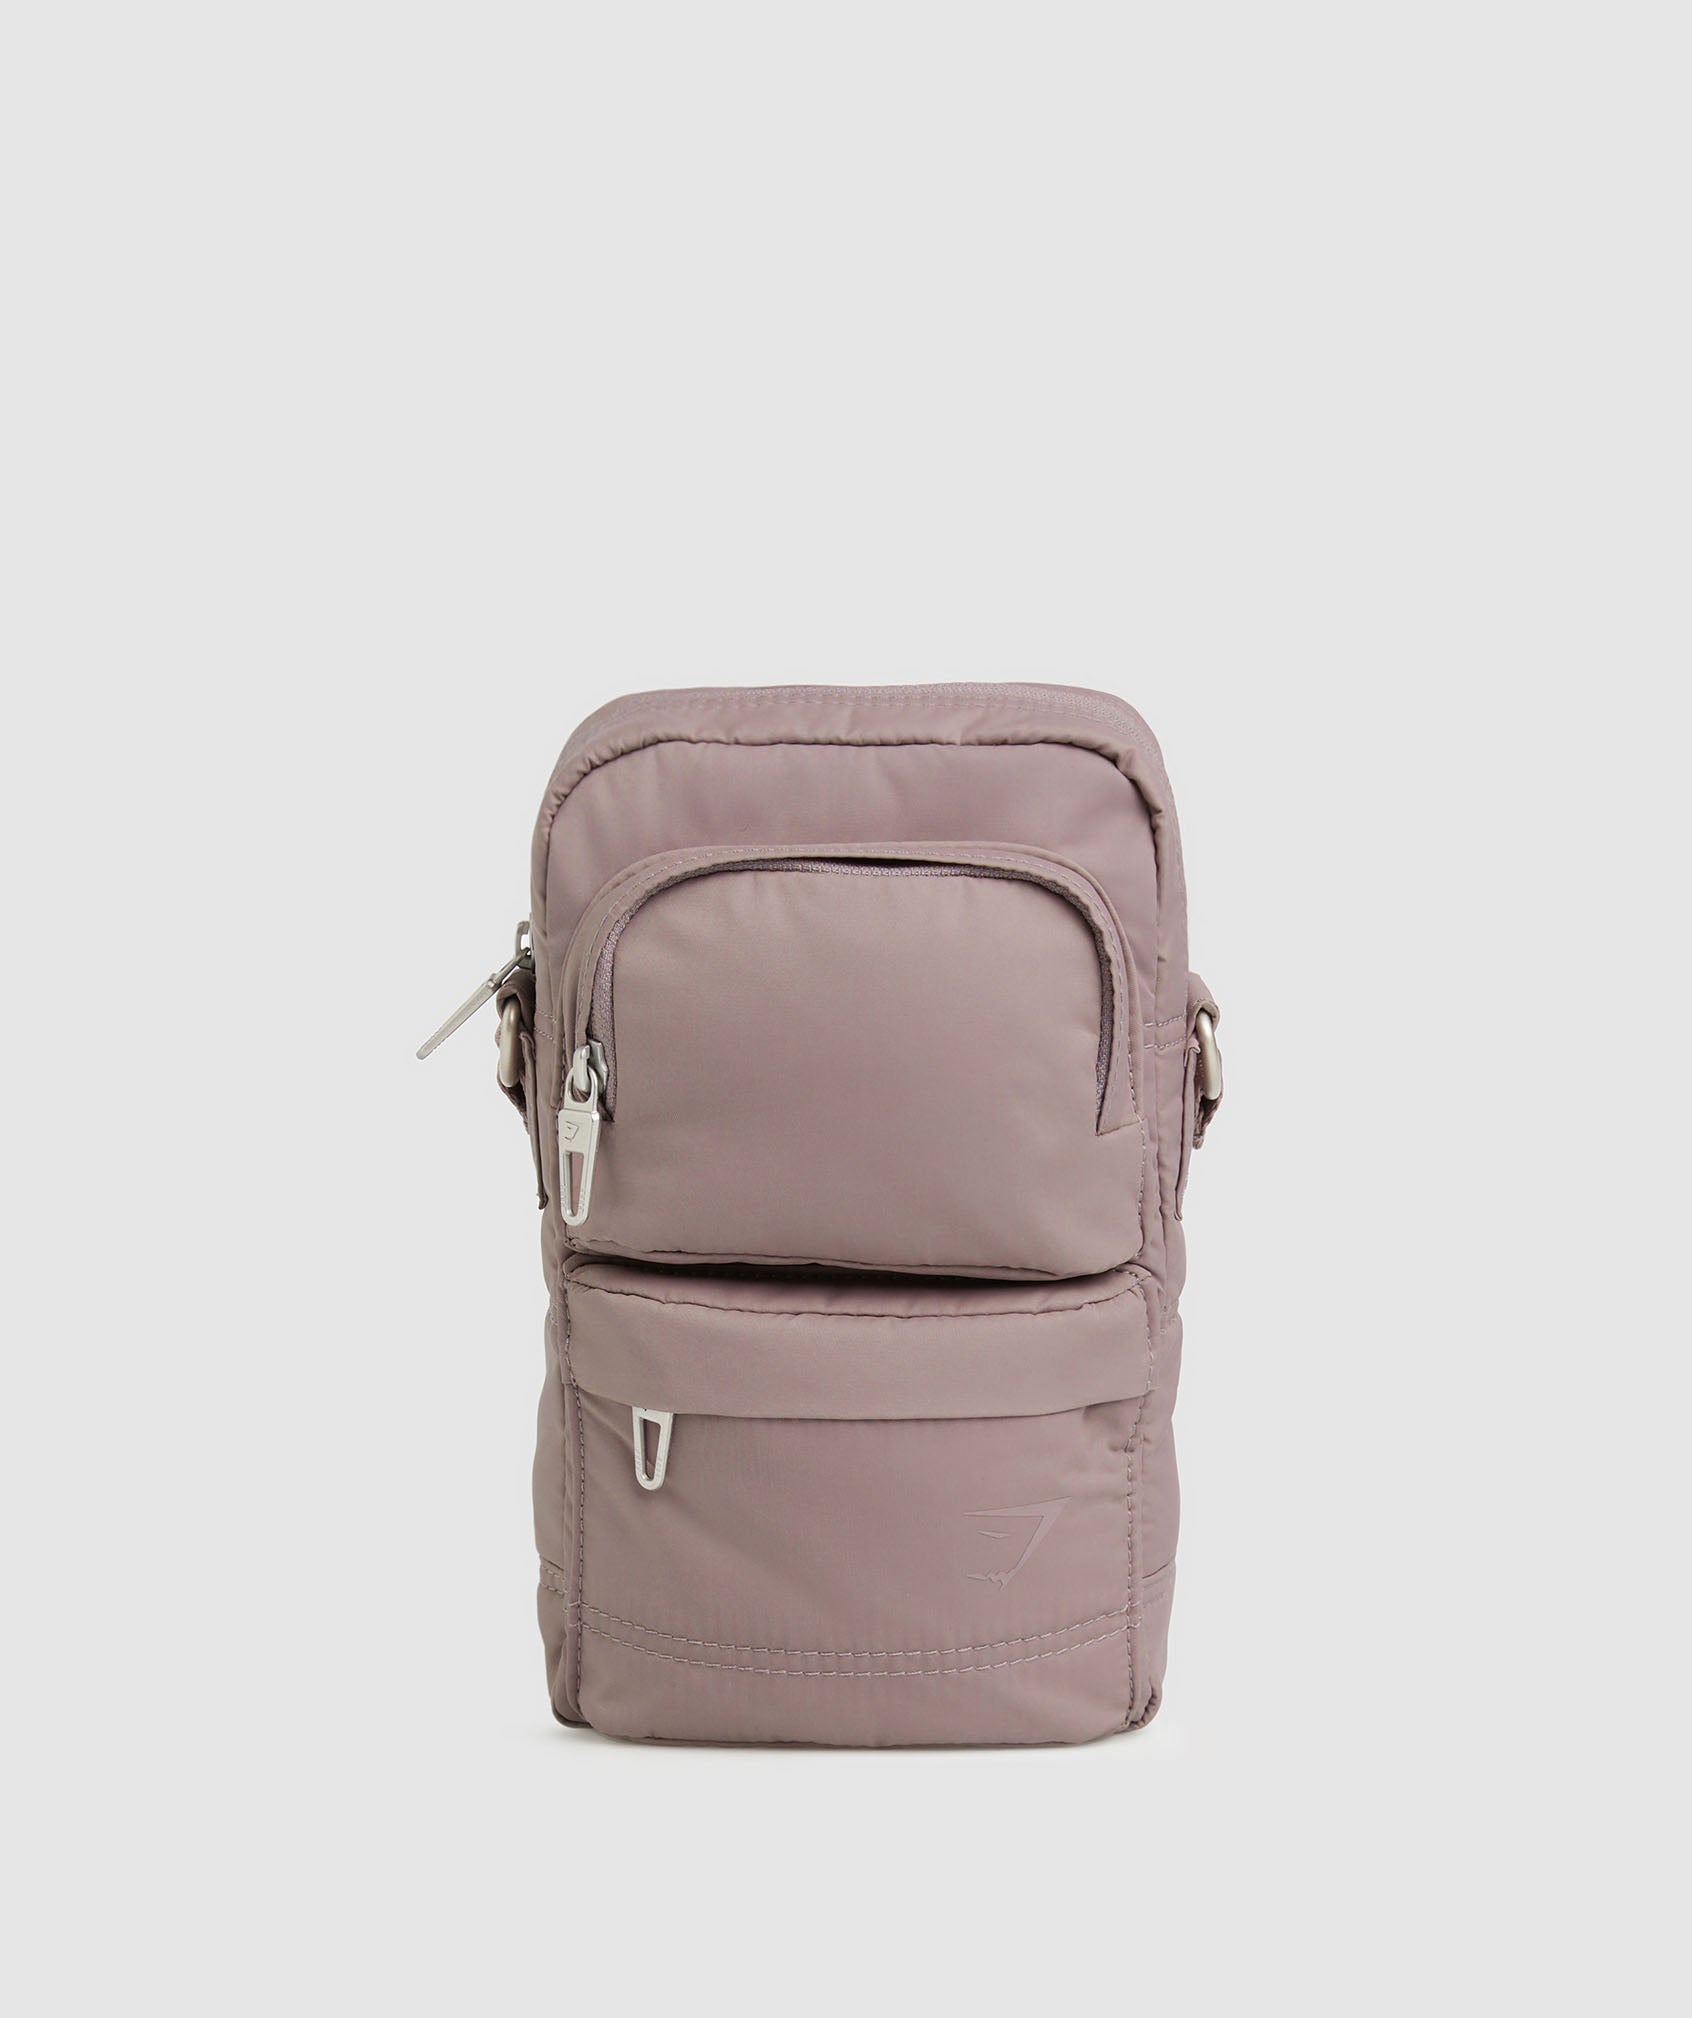 Premium Lifestyle Cross Body in Washed Mauve